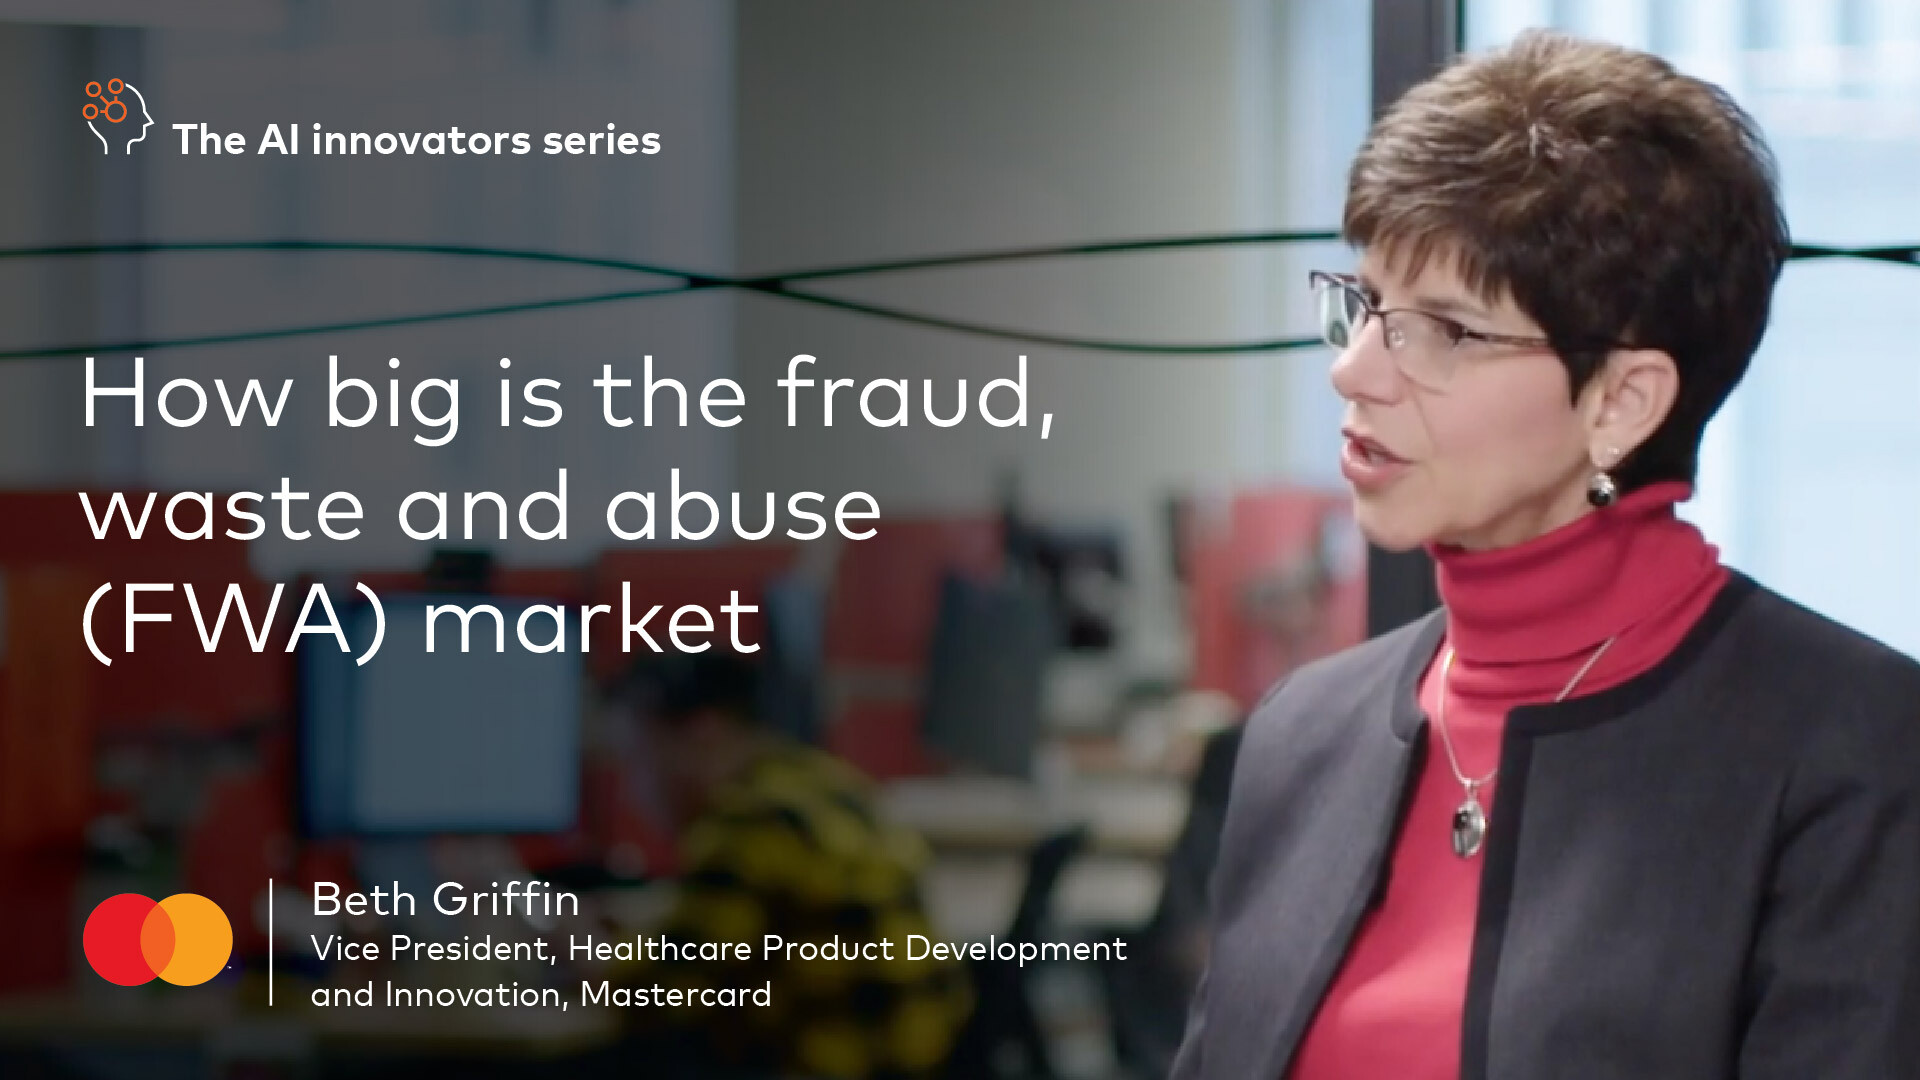 How big is the fraud, waste, and abuse (FWA) market